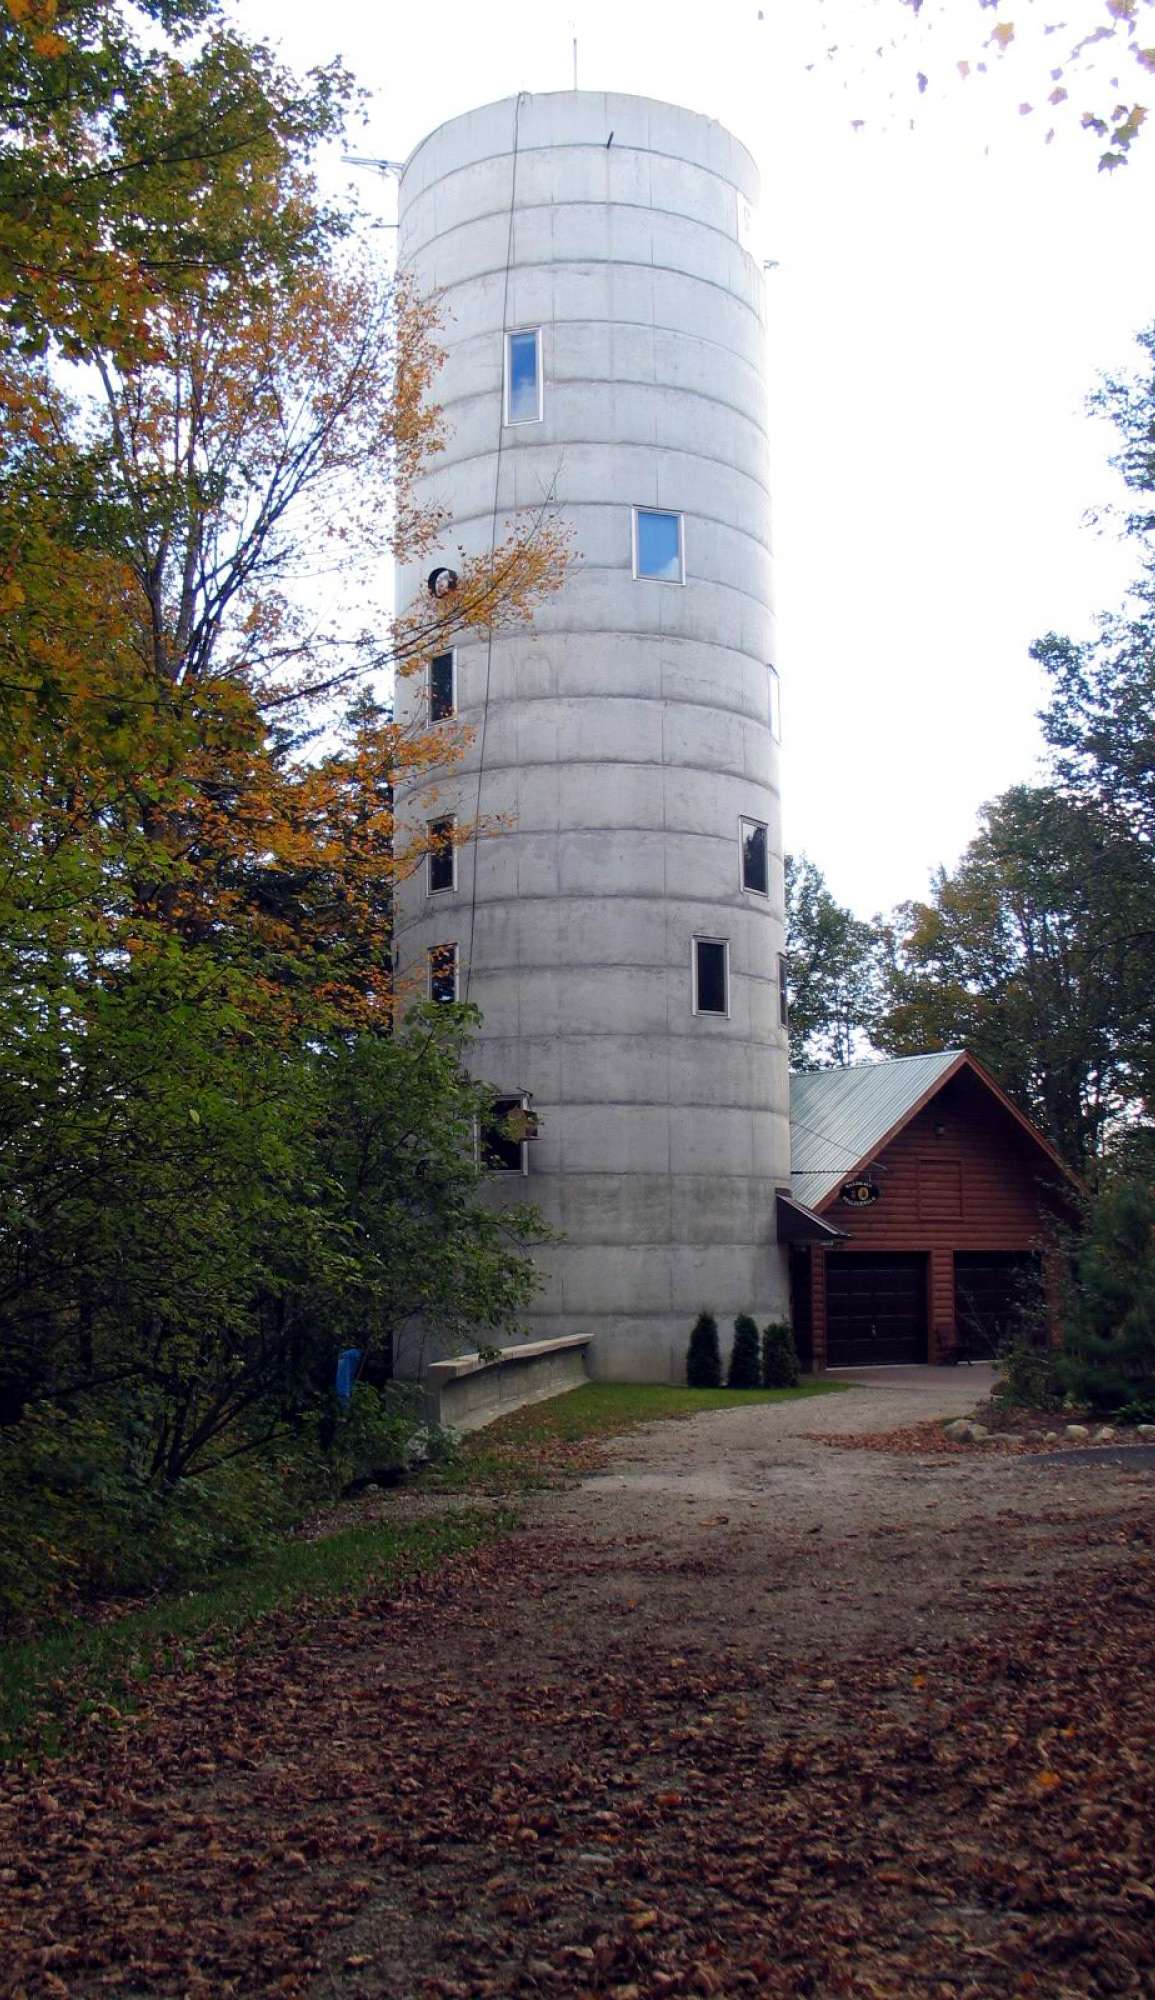 silo houses images